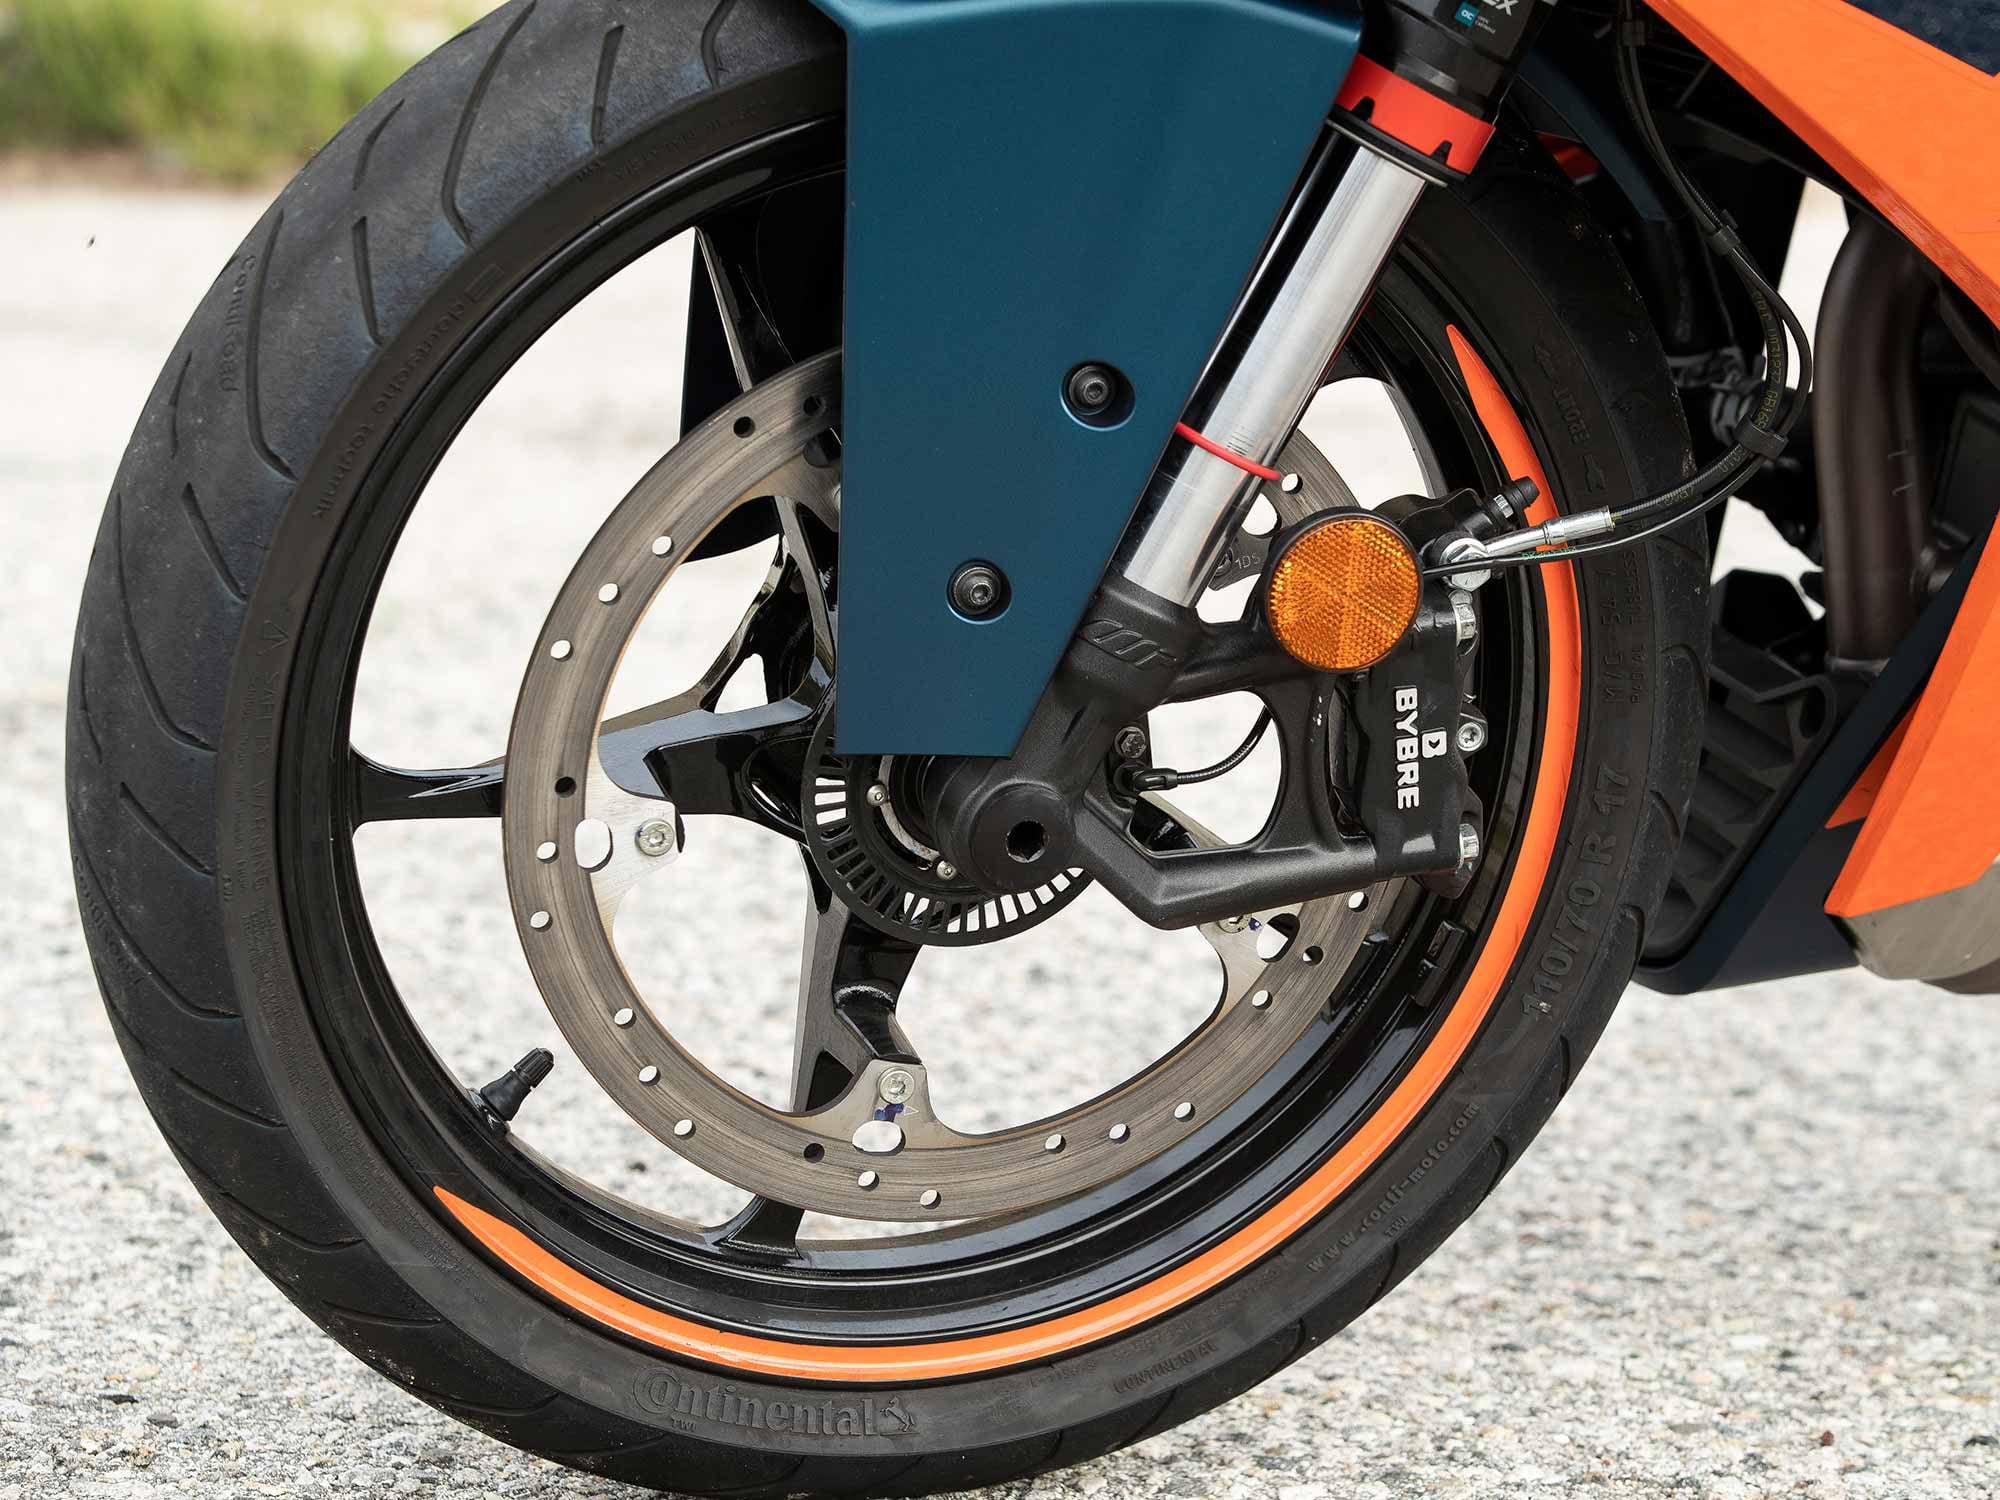 Feel from the front brake is strong and stops the bike well, however on the <i>Cycle World</i> test strip the RC 390 returned a longish 147 feet to stop from 60 mph.